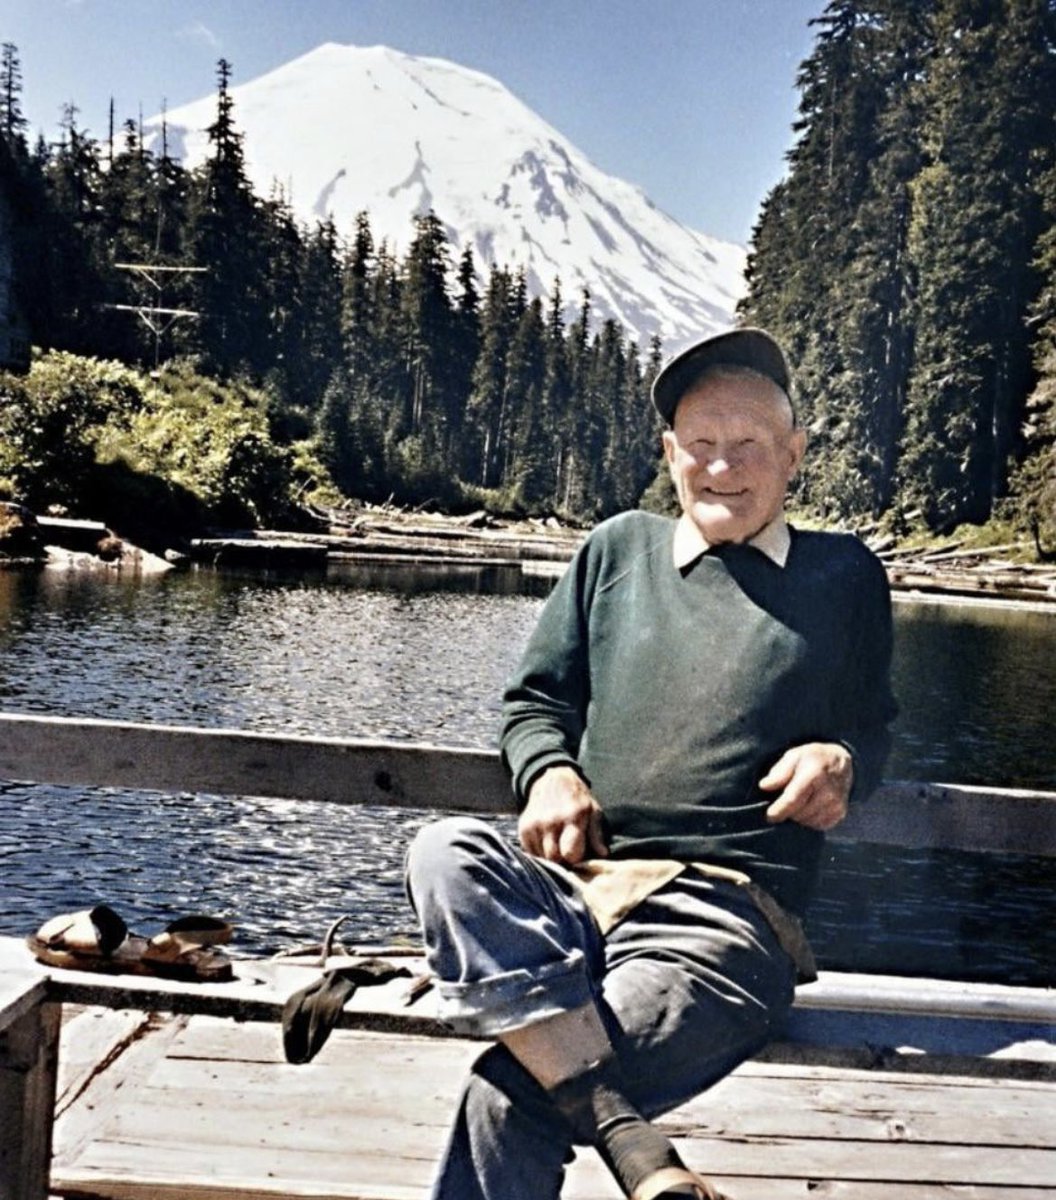 @fasc1nate Harry R. Truman was a resident of Spirit Lake, located at the foot of Mount St. Helens in Washington state. He famously refused to evacuate during the volcano's 1980 eruption despite numerous warnings from authorities. Truman became a symbol of defiance and independence, but